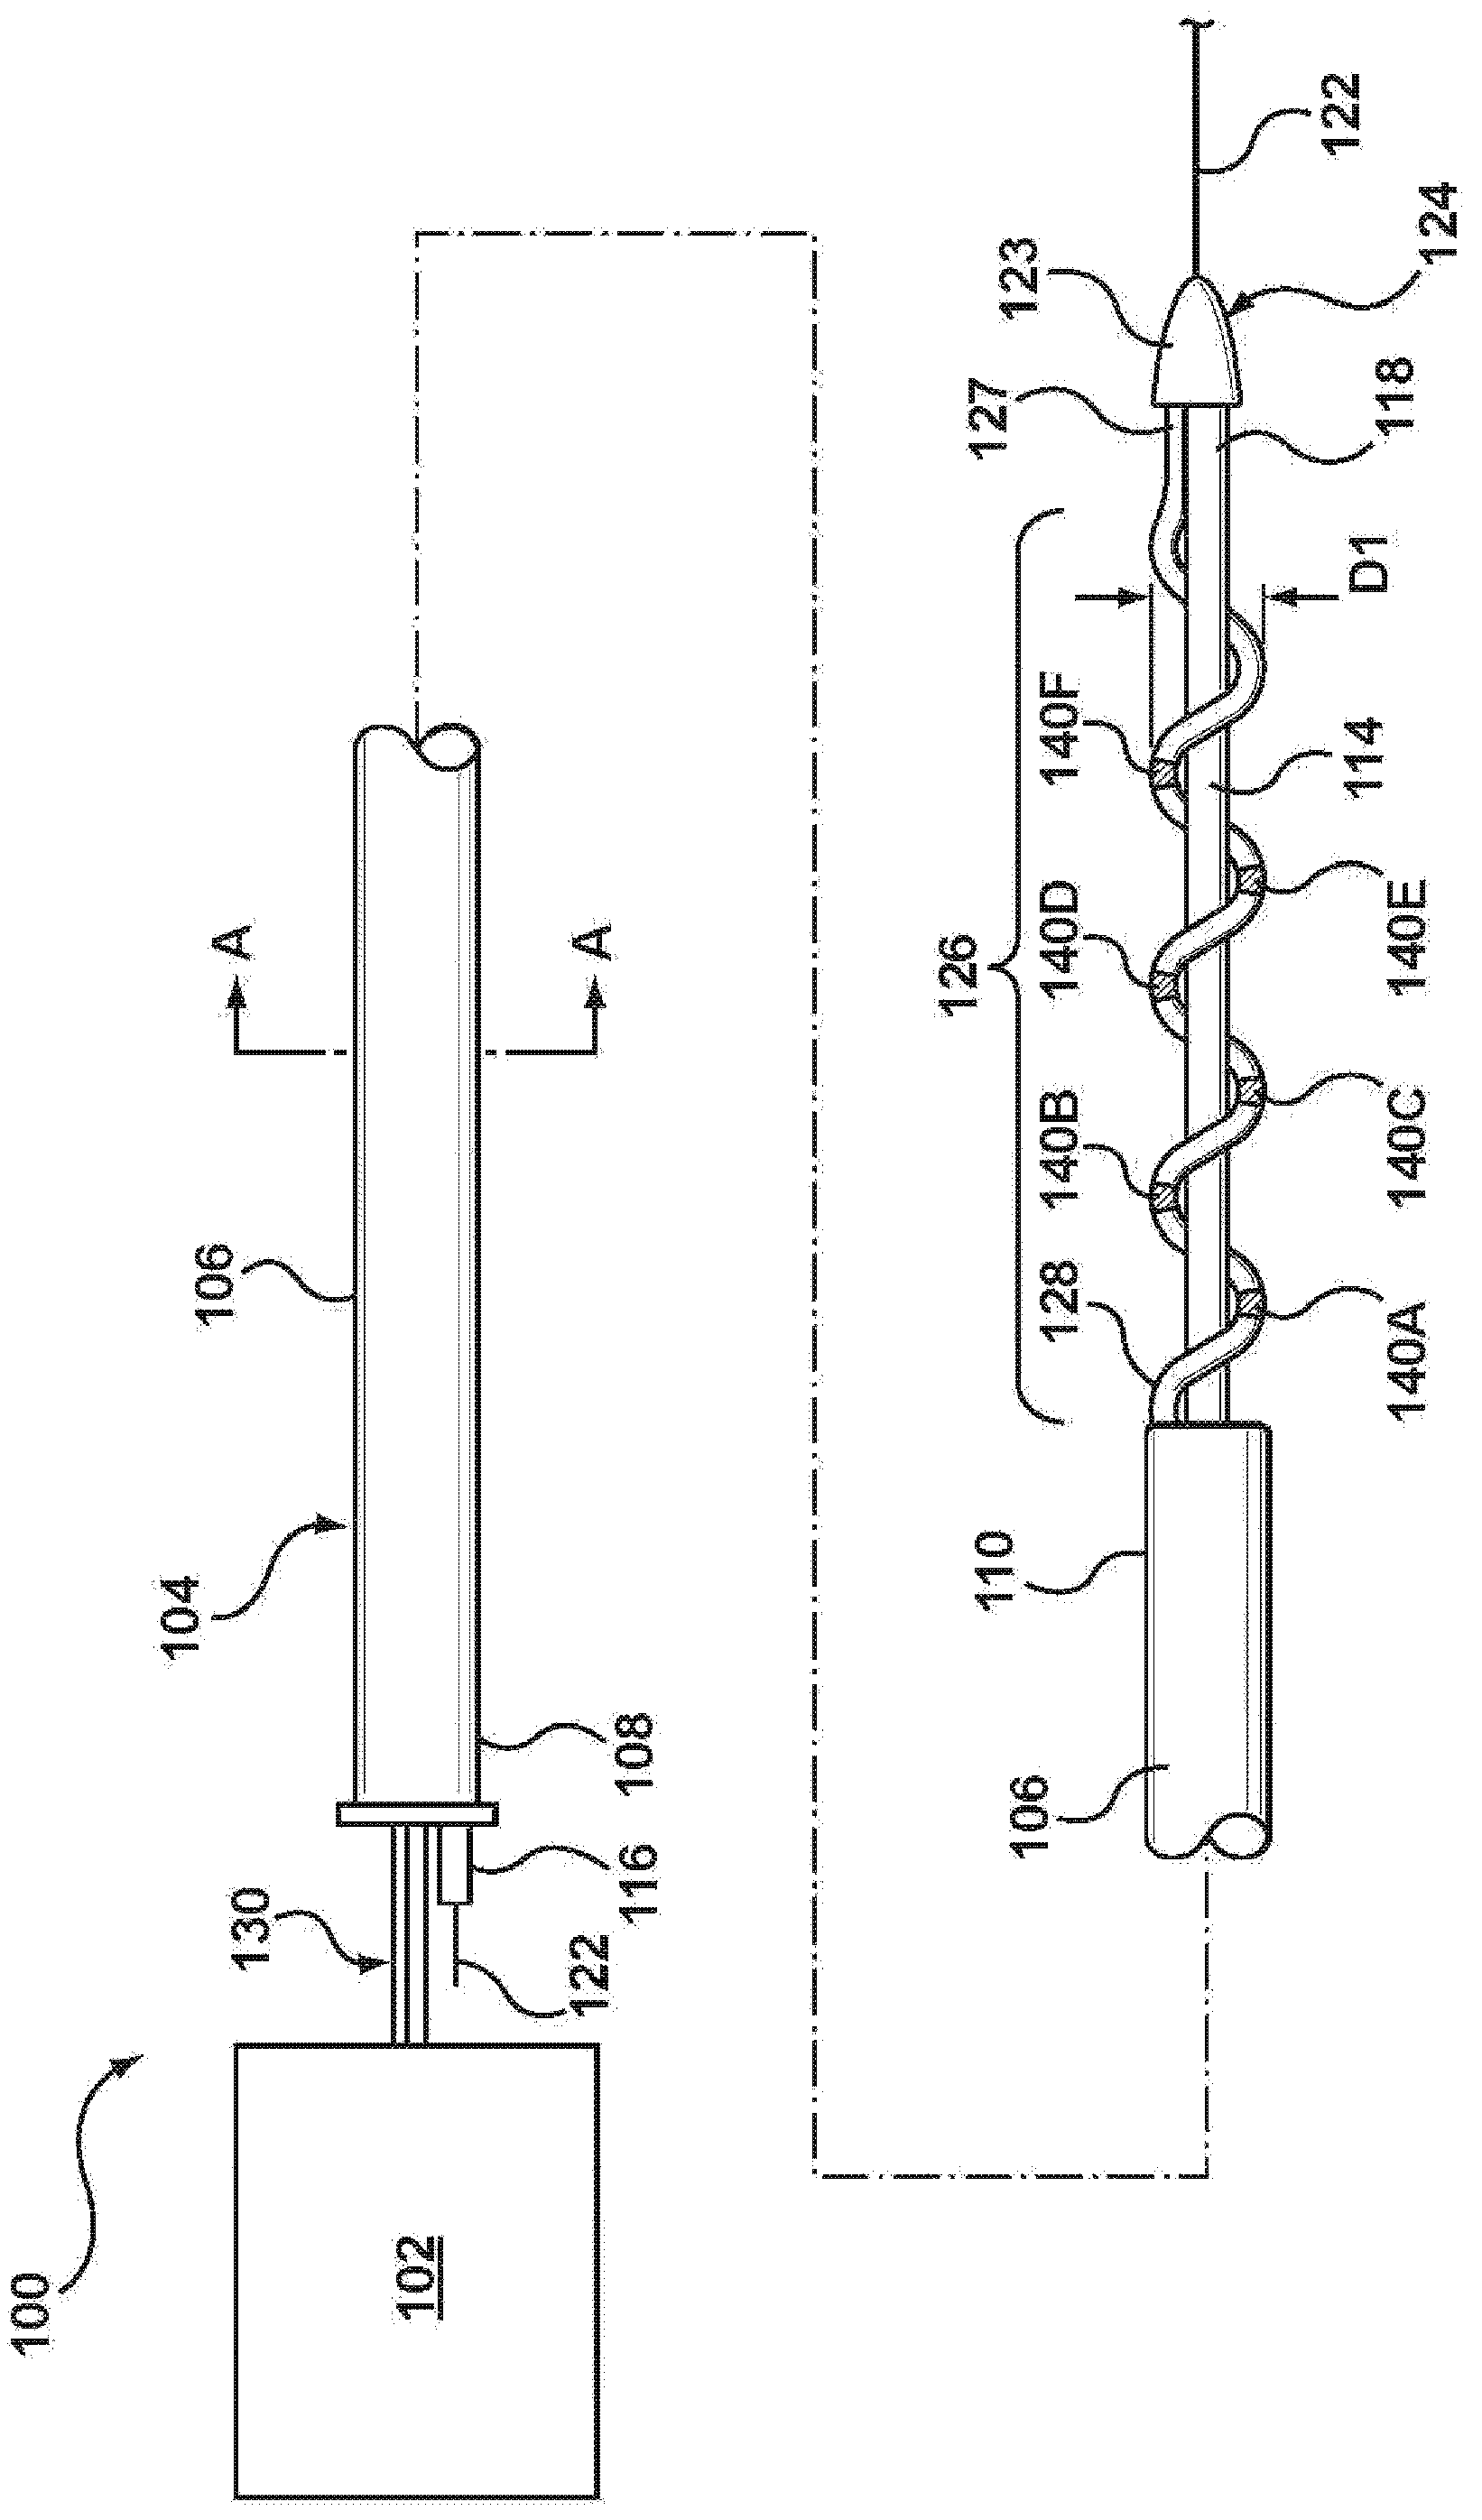 Ablation catheter equipped with shape memory material